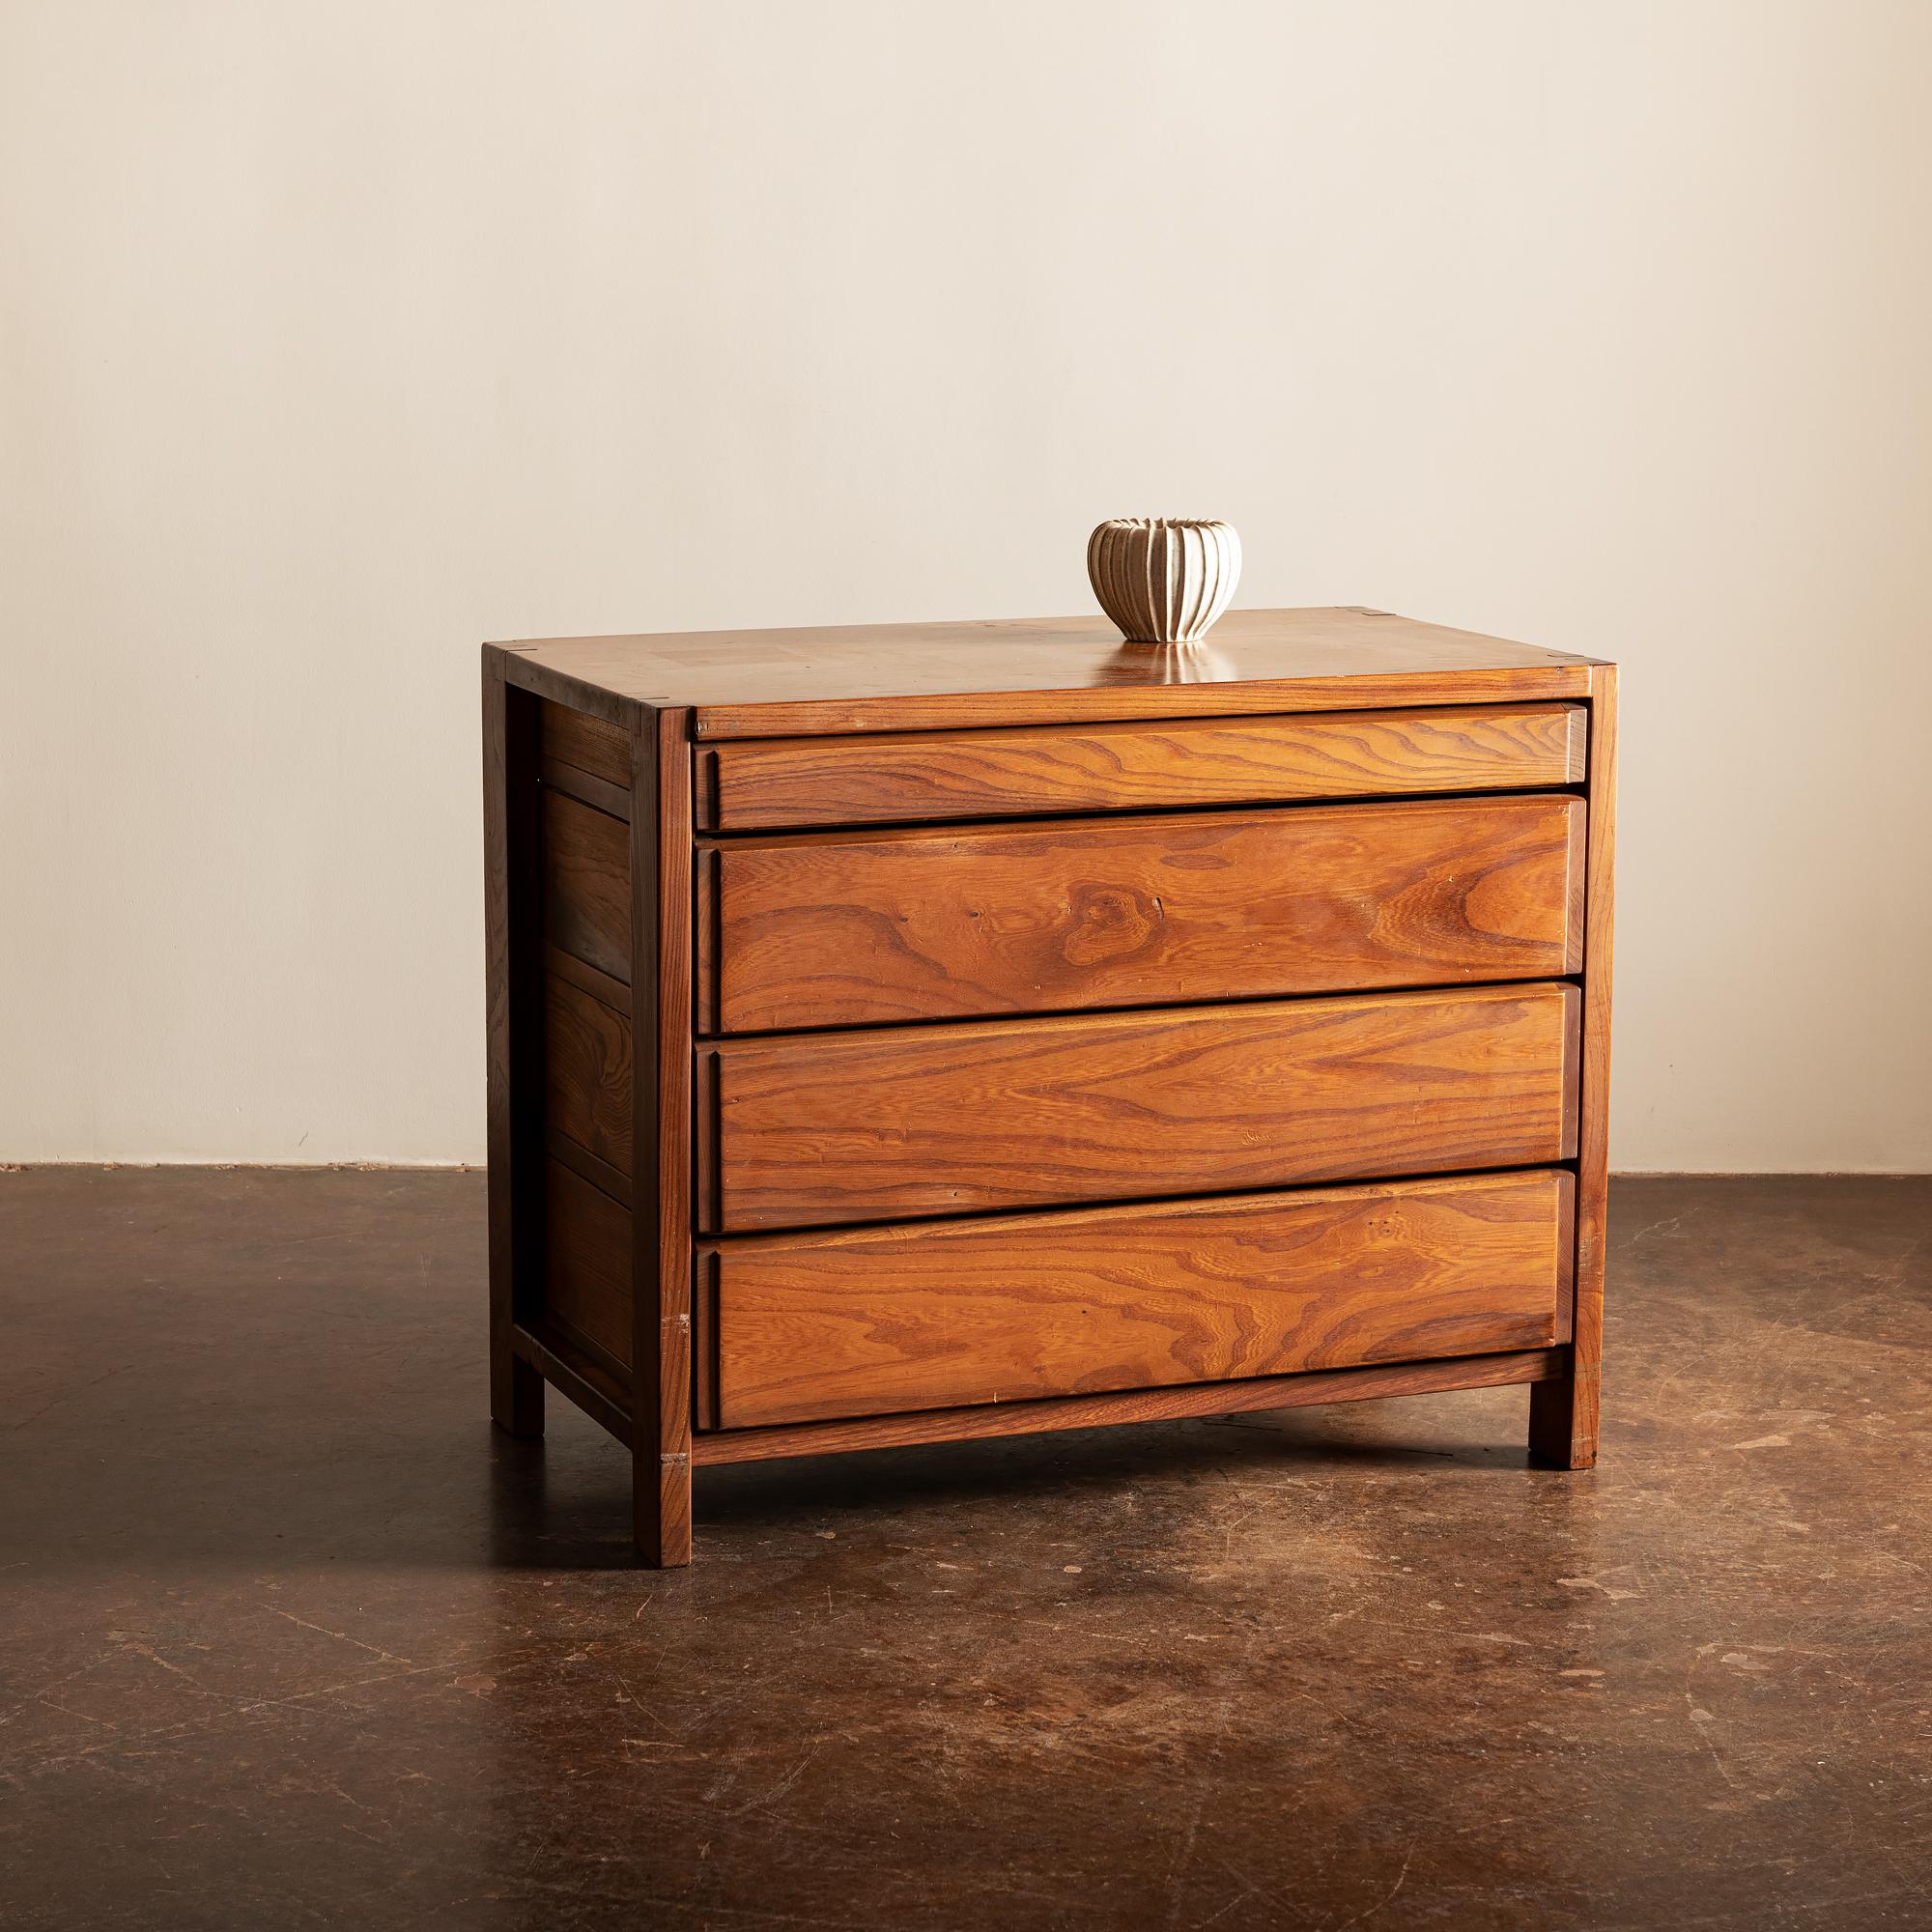 Handsome bureau by Pierre Chapo with his signature dovetail joinery and elegant details in solid elm.